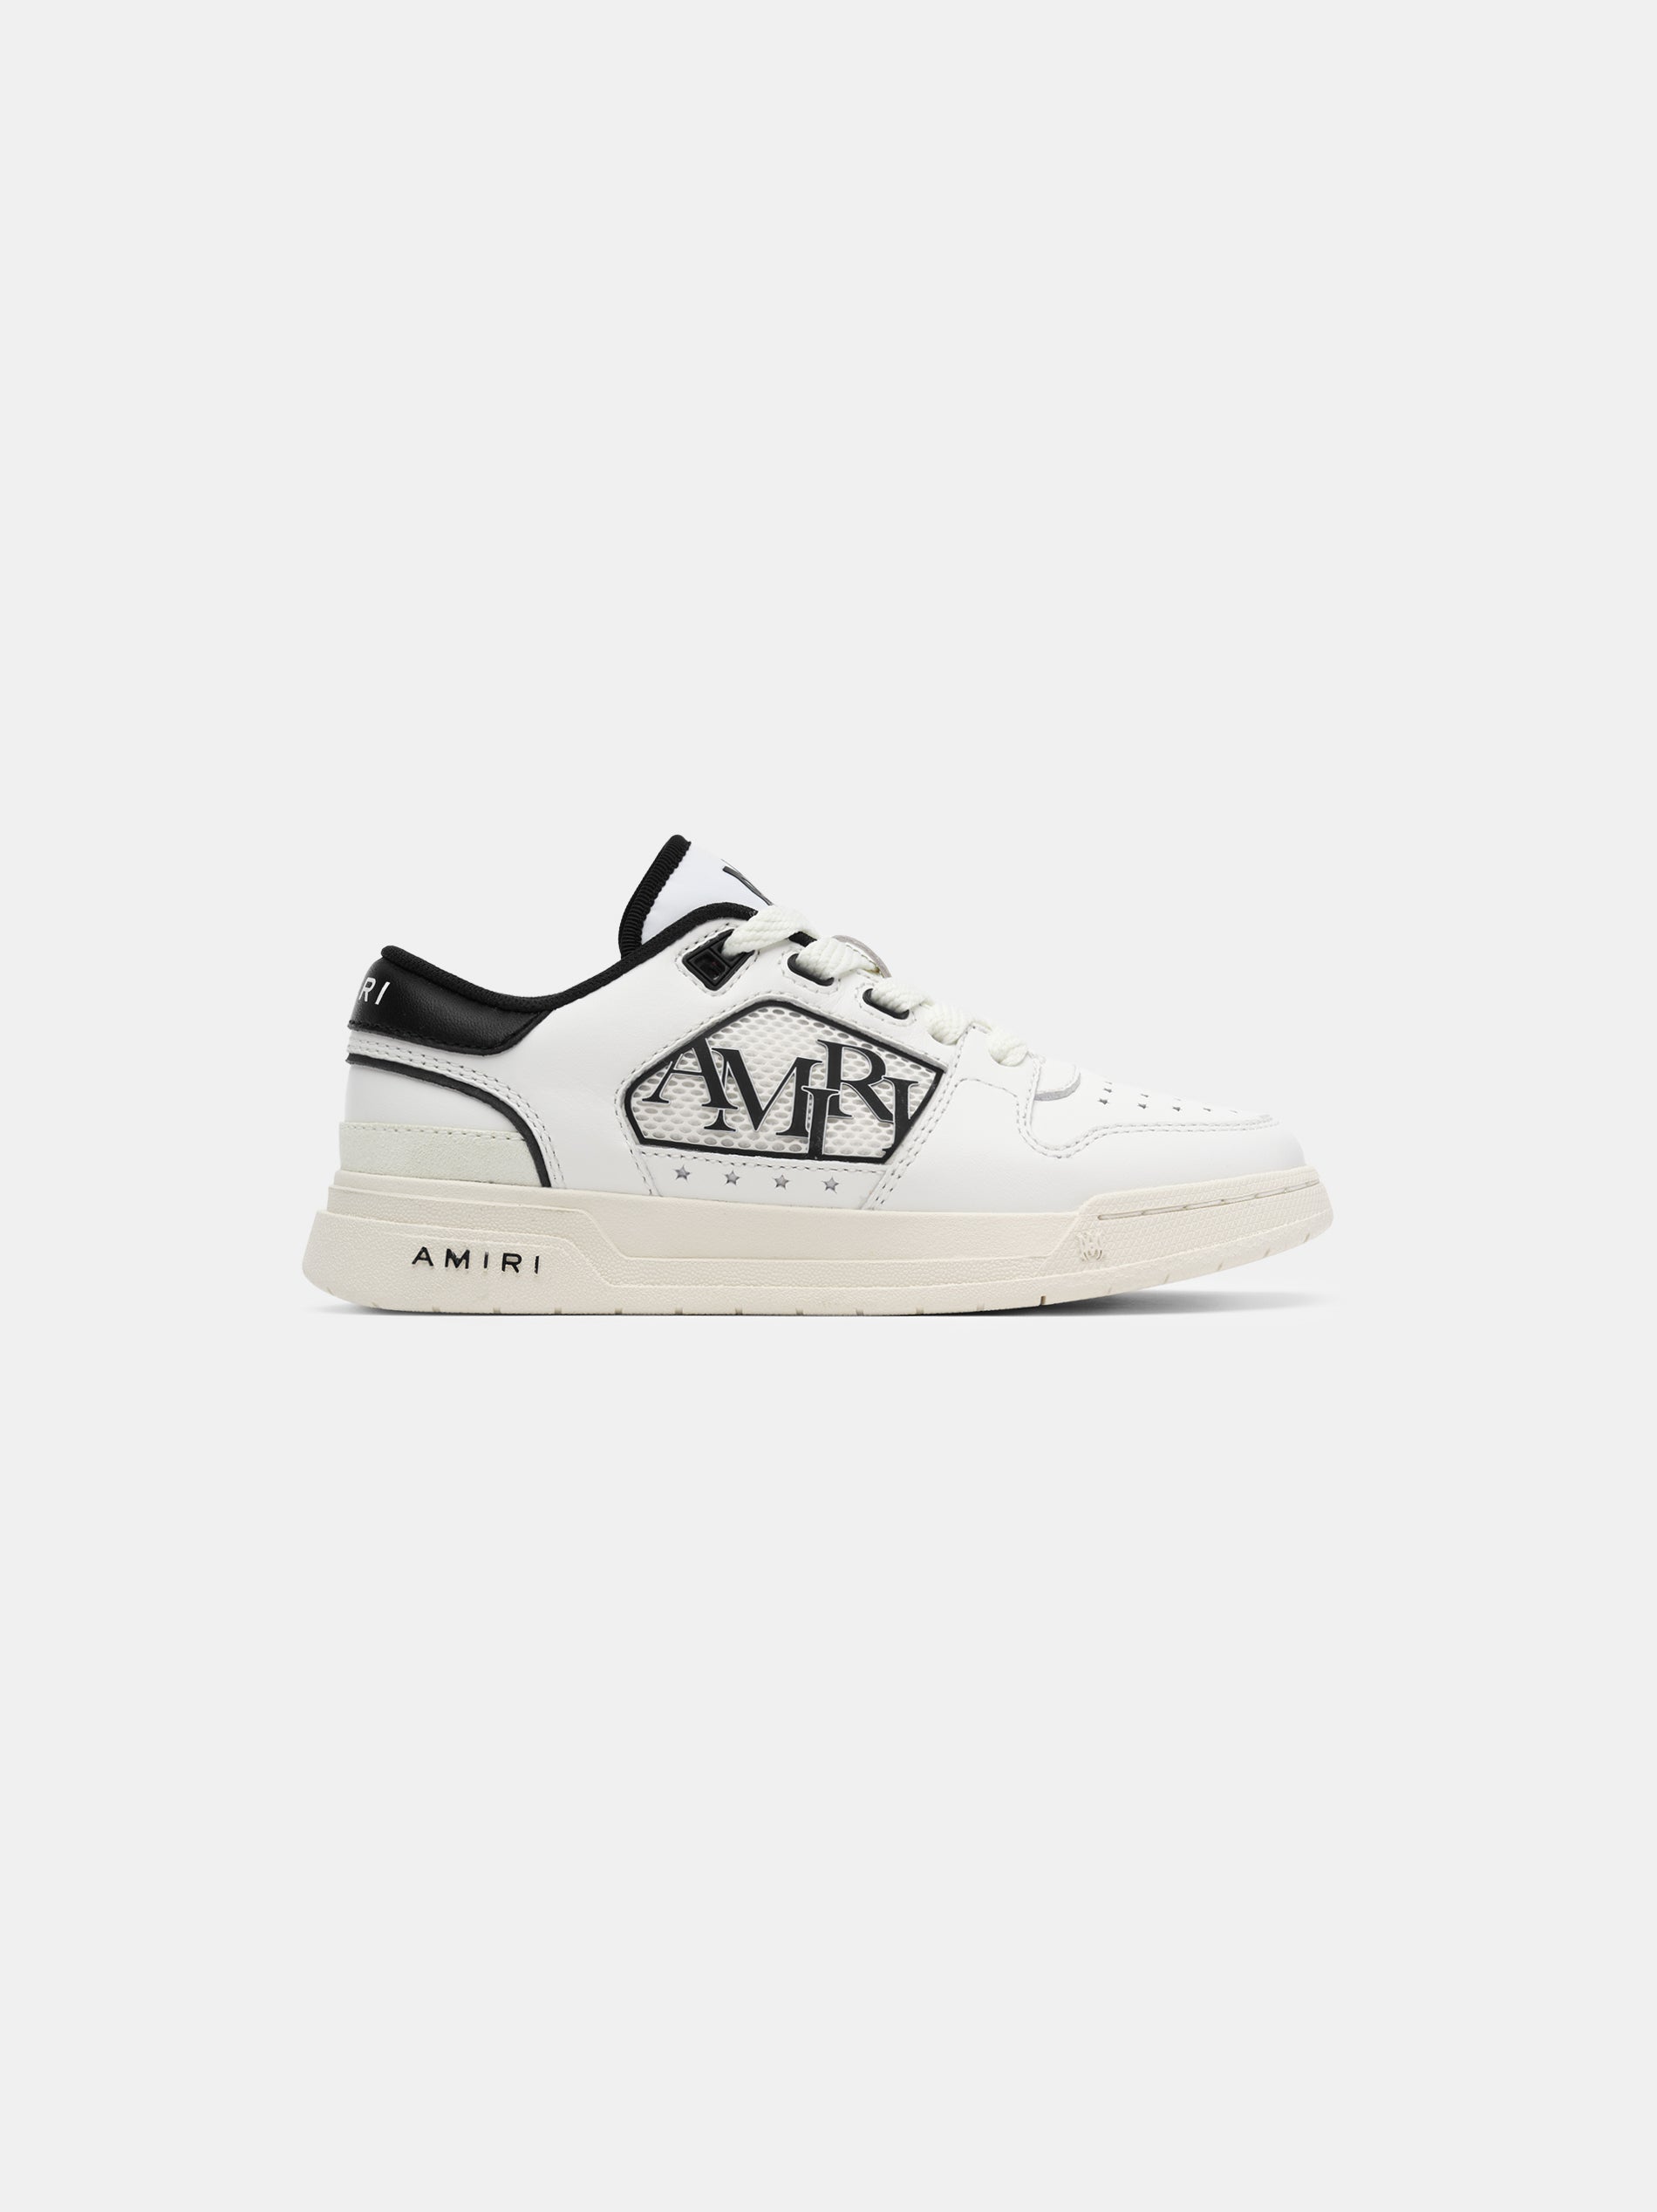 Product KIDS - CLASSIC LOW - White Black featured image